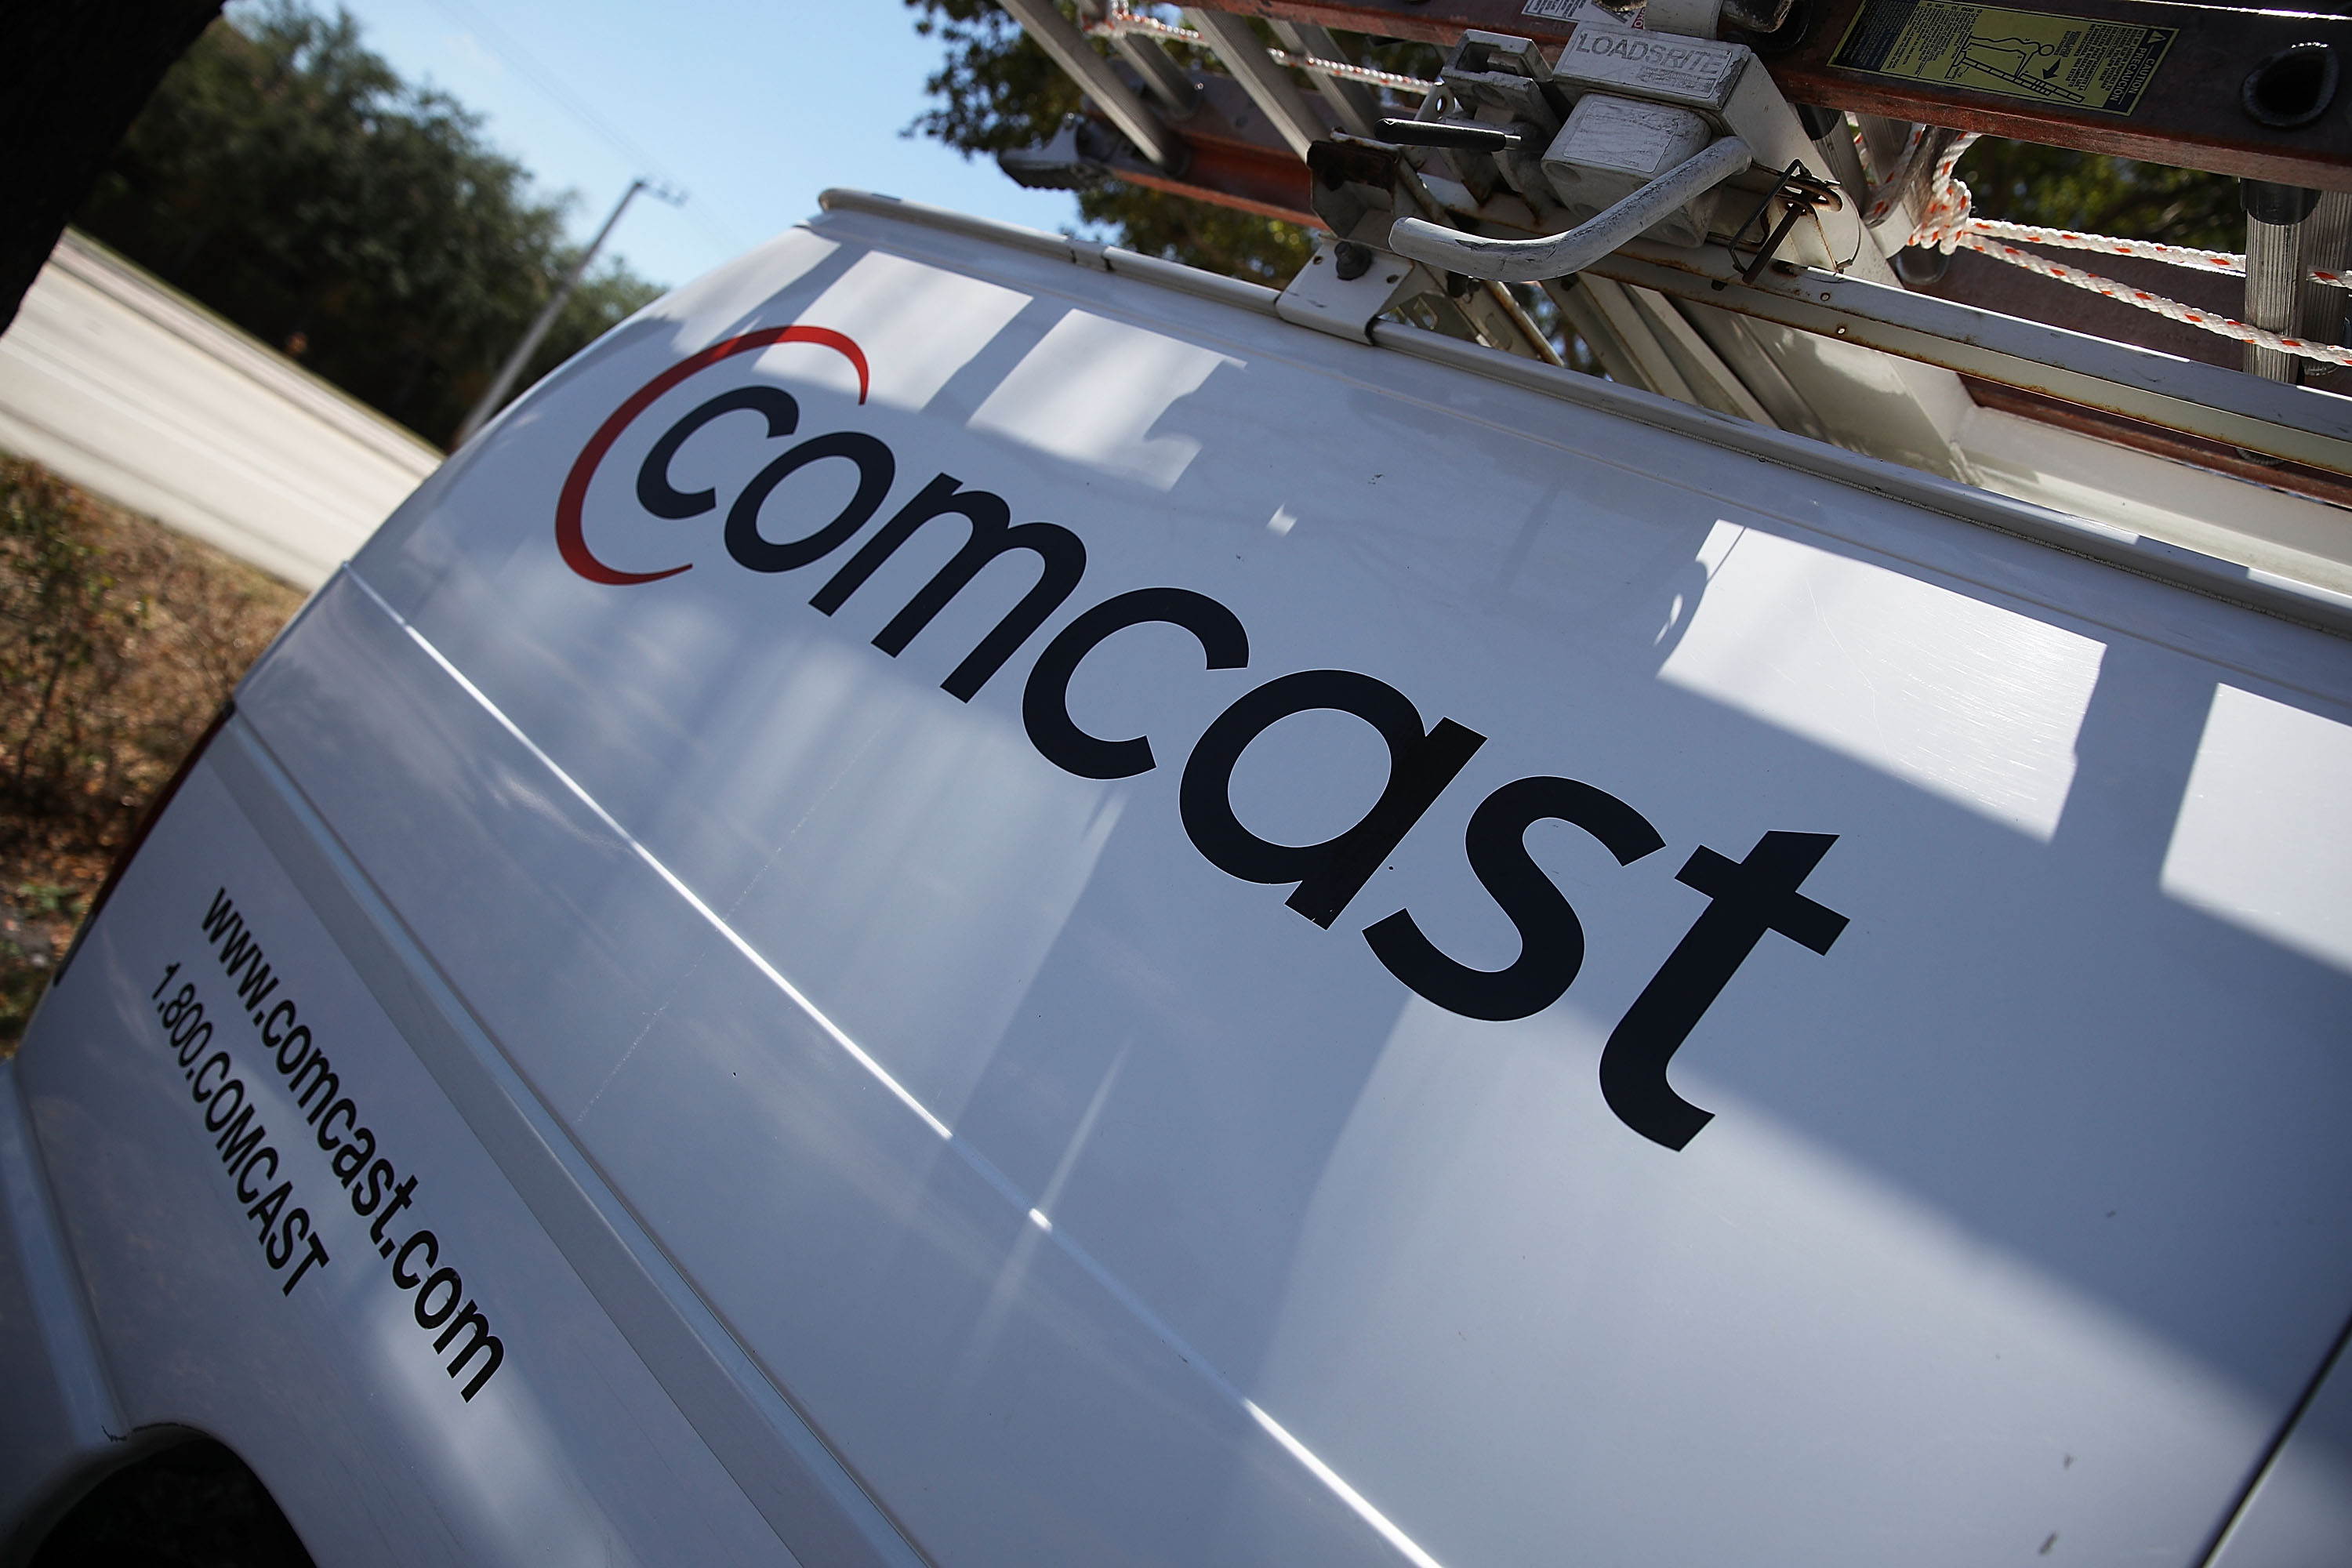 Comcast’s steady cable business is looking&nbsp;better by the day.